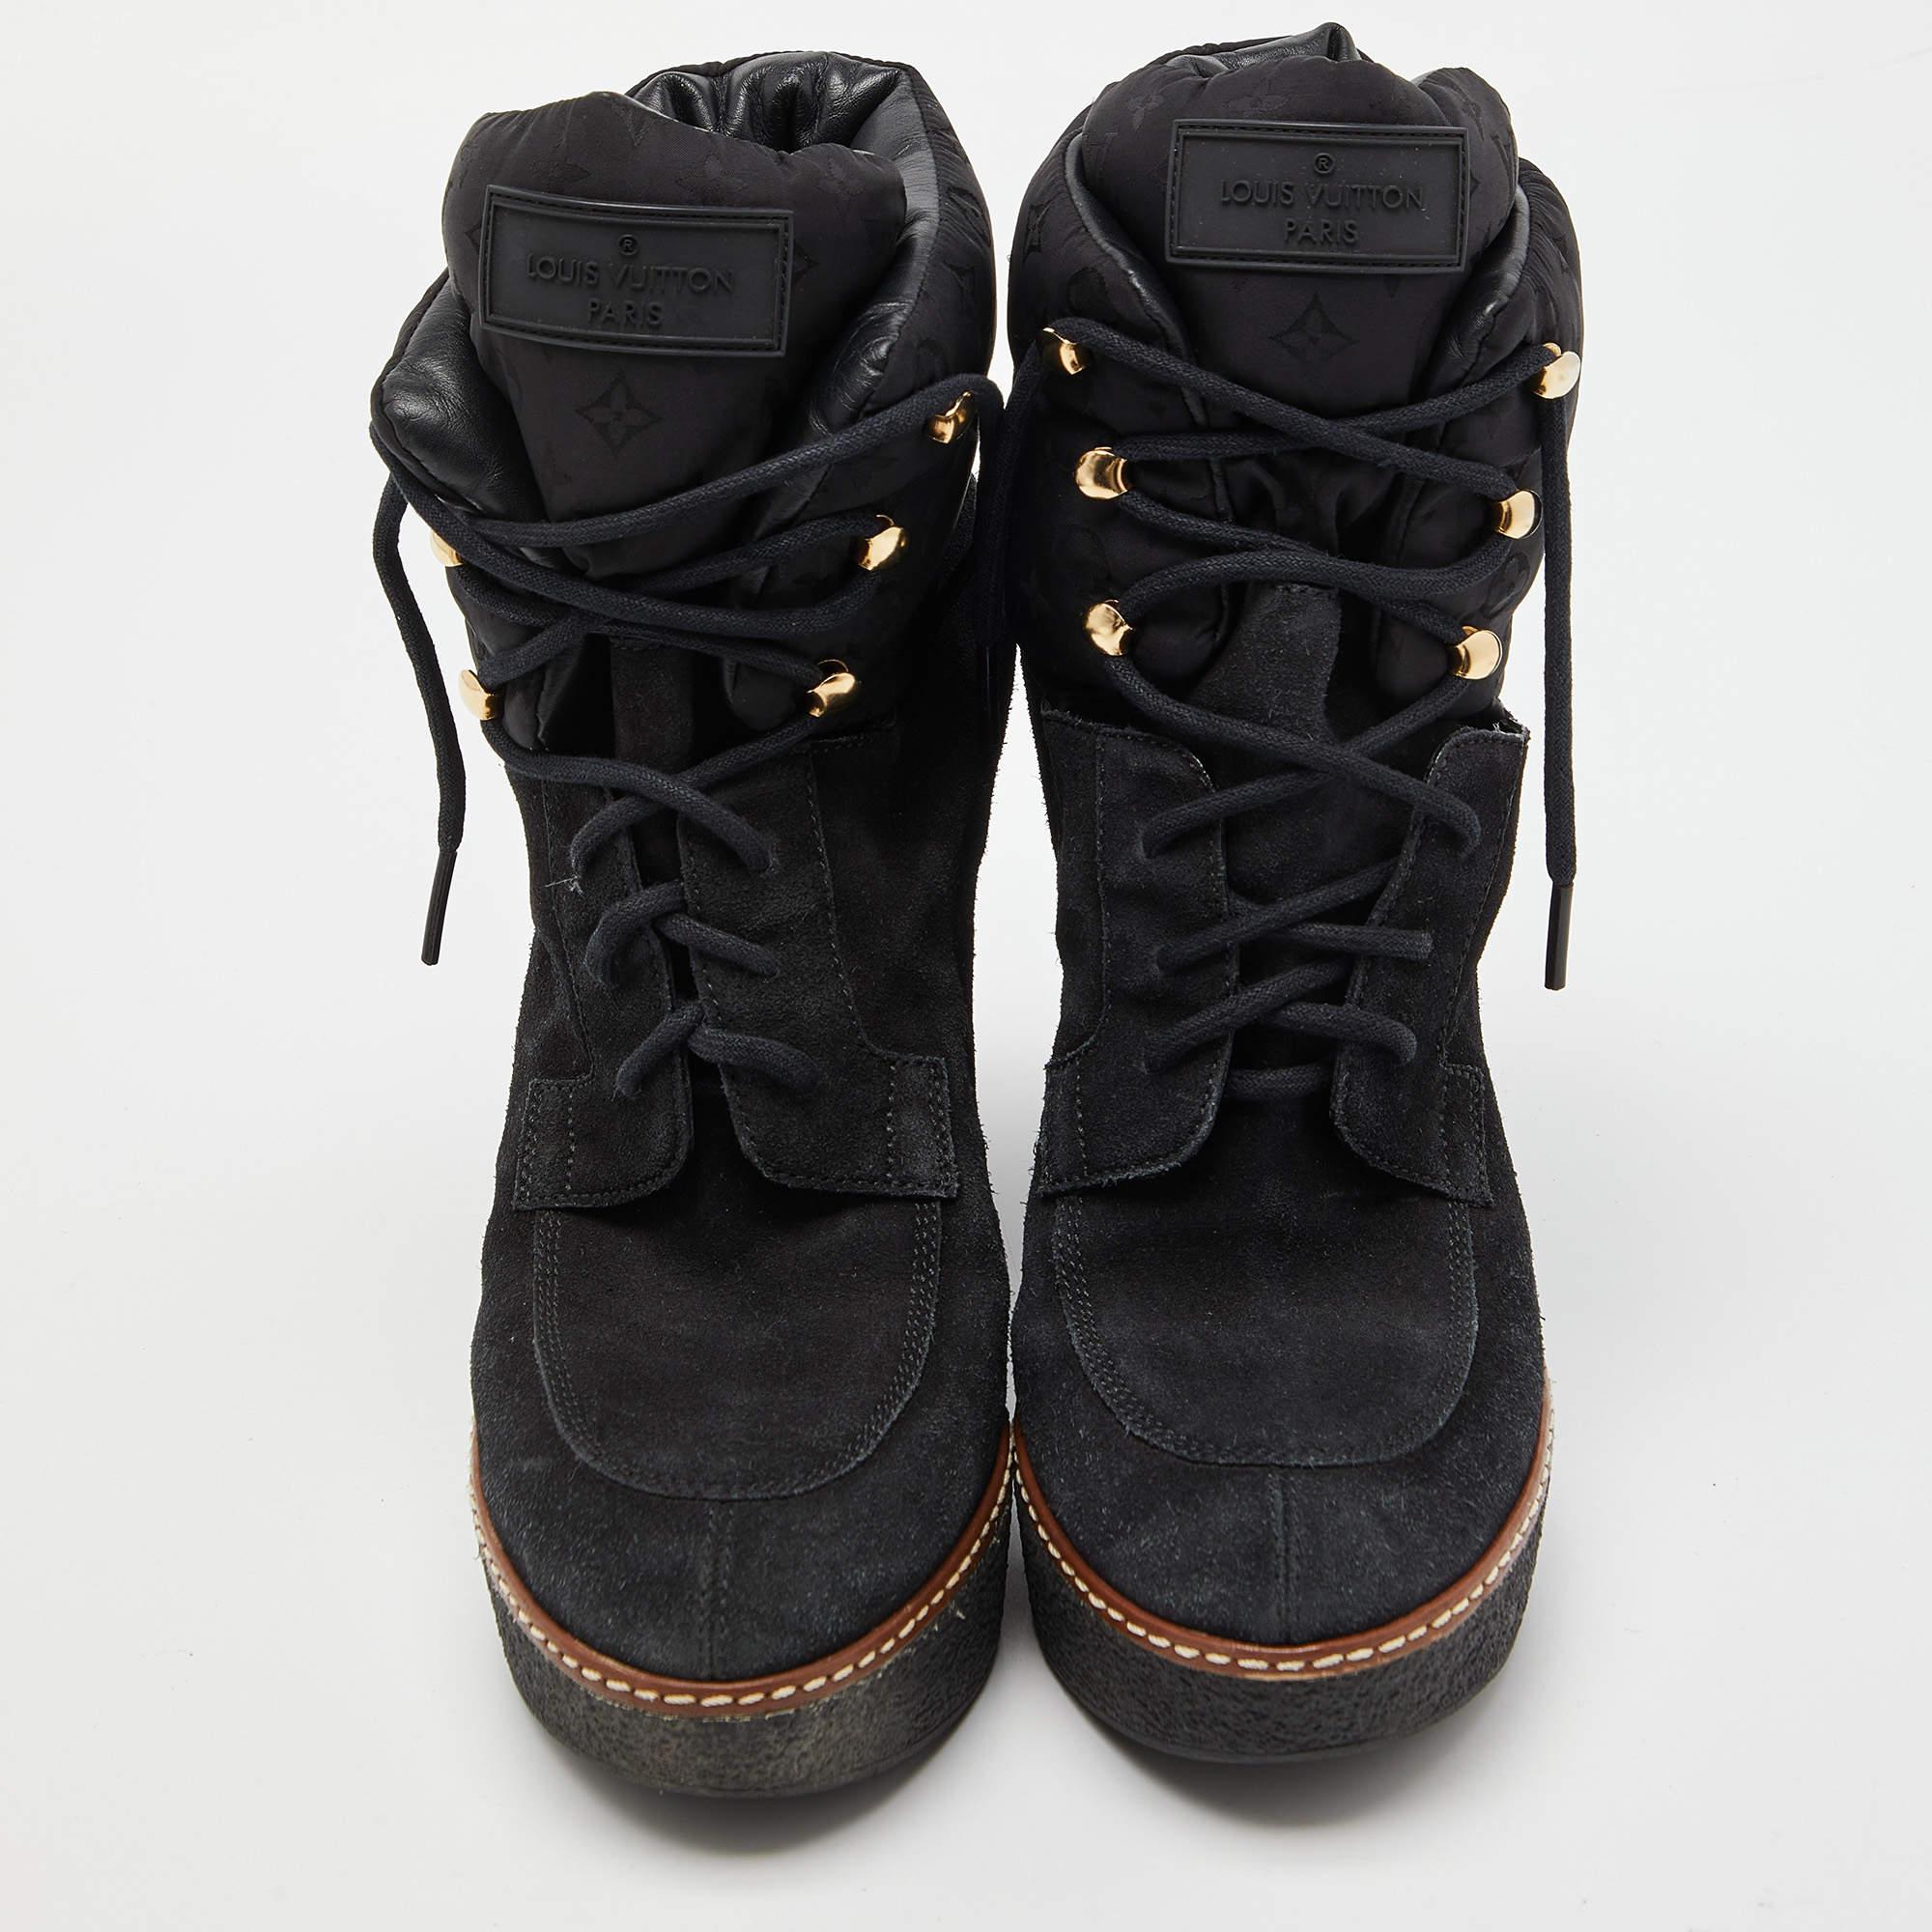 Louis Vuitton Black Suede and Monogram Fabric Wedge Ankle Boots For Sale 1